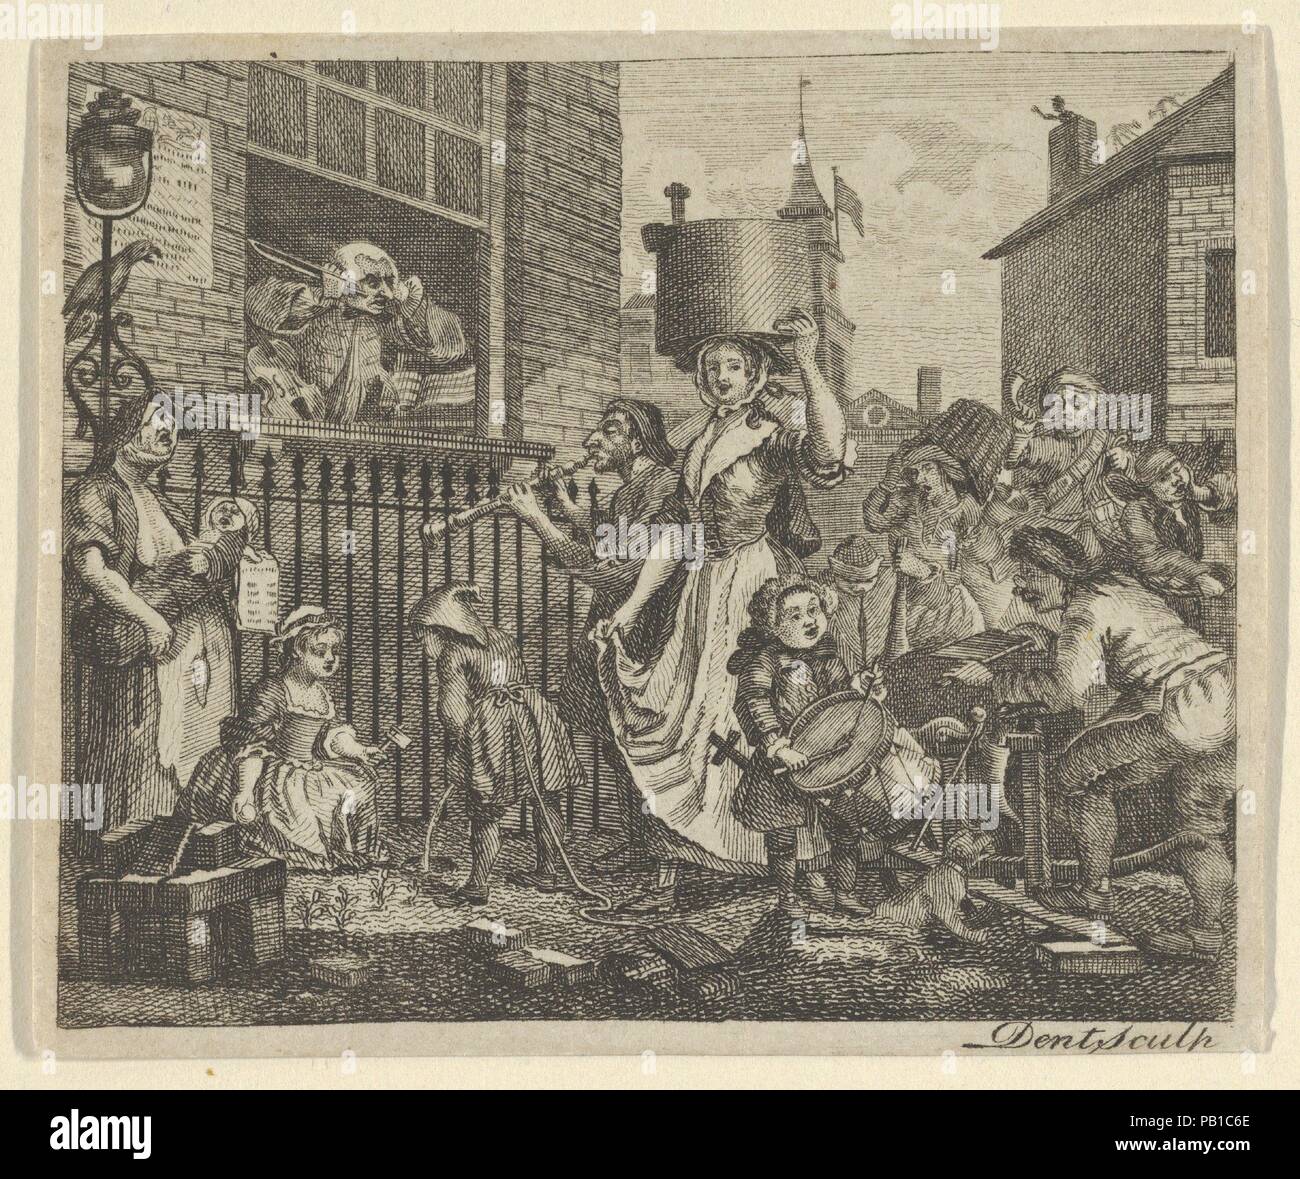 The Enraged Musician. Artist: After William Hogarth (British, London 1697-1764 London). Dimensions: Sheet: 2 5/8 x 3 1/8 in. (6.7 x 8 cm). Engraver: Dent (British, active ca. 1800). Date: ca. 1800. Museum: Metropolitan Museum of Art, New York, USA. Stock Photo